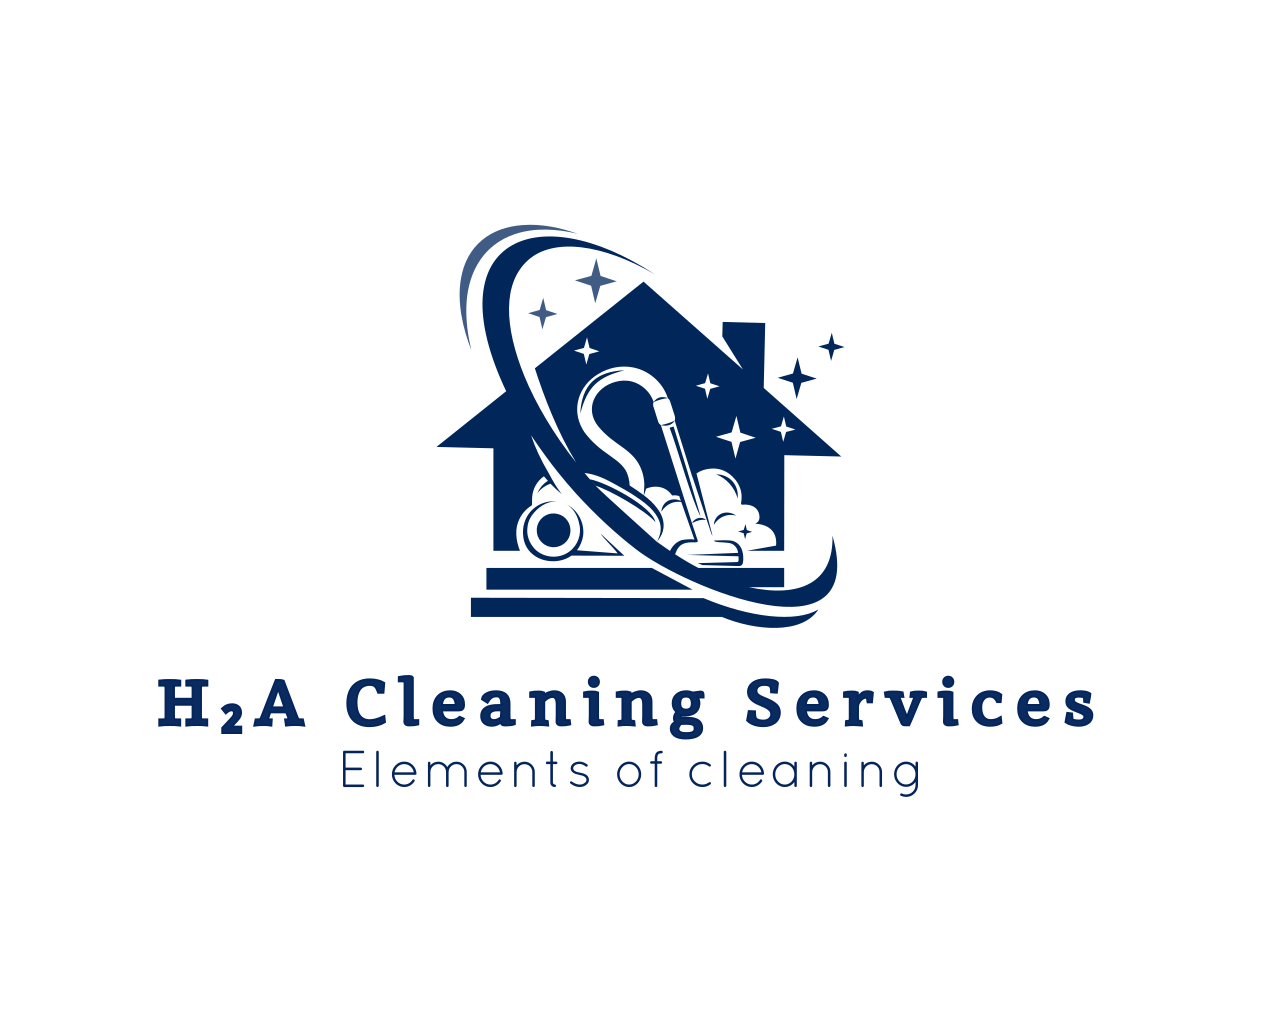 H₂A Cleaning Services 's web page